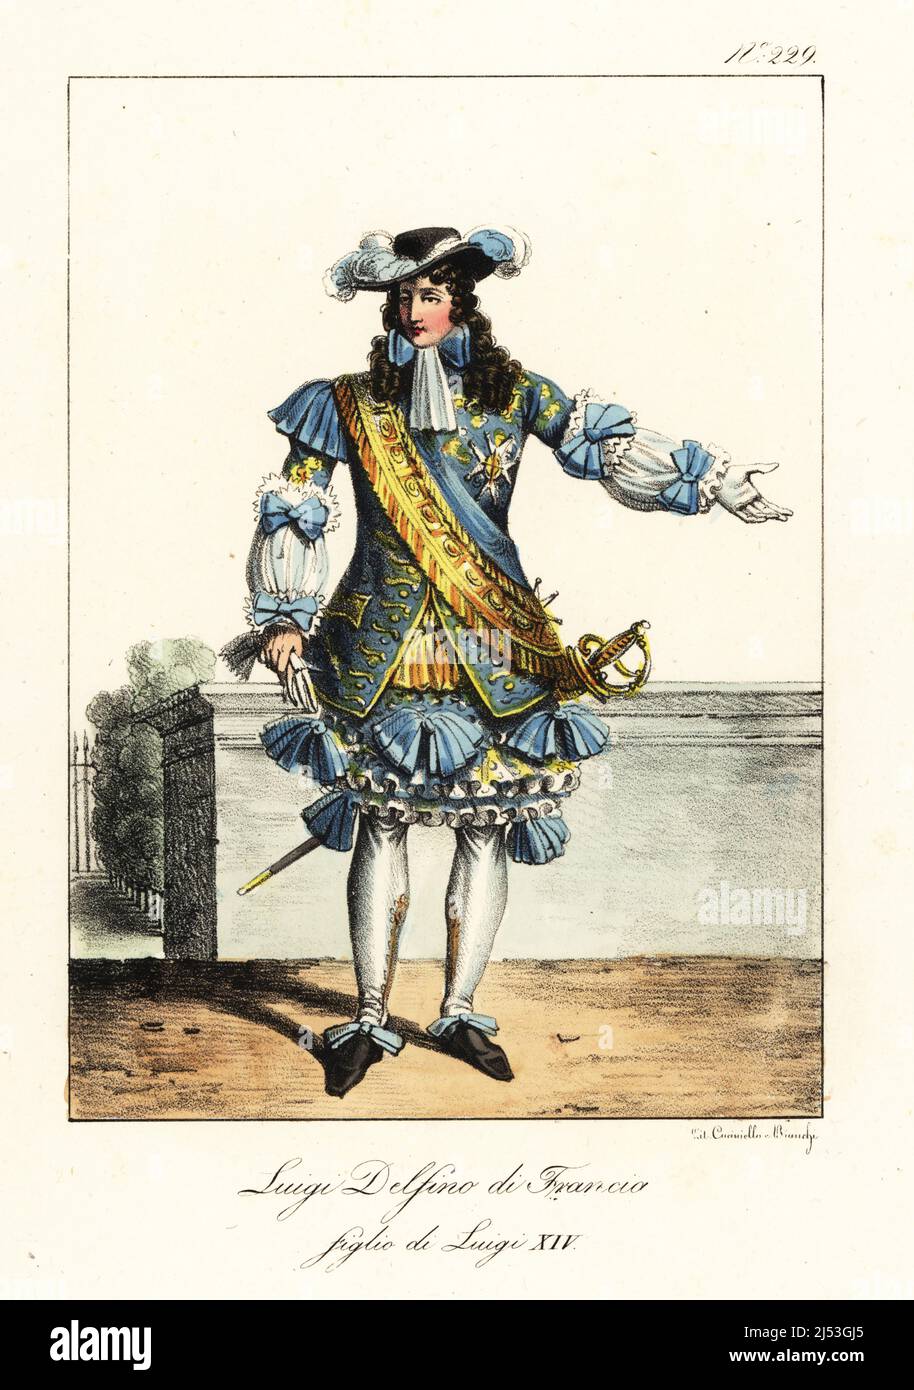 Louis, Grand Dauphin of France, 1661-1711. In plumed hat, embroidered coat with one epaulette and ribbons, gold sash, breeches, hose, ribbon shoes, court sword. Dauphin de France, fils de Louis XIV. Handcoloured lithograph by Lorenzo Bianchi and Domenico Cuciniello after Hippolyte Lecomte from Costumi civili e militari della monarchia francese dal 1200 al 1820, Naples, 1825. Italian edition of Lecomte’s Civilian and military costumes of the French monarchy from 1200 to 1820. Stock Photo